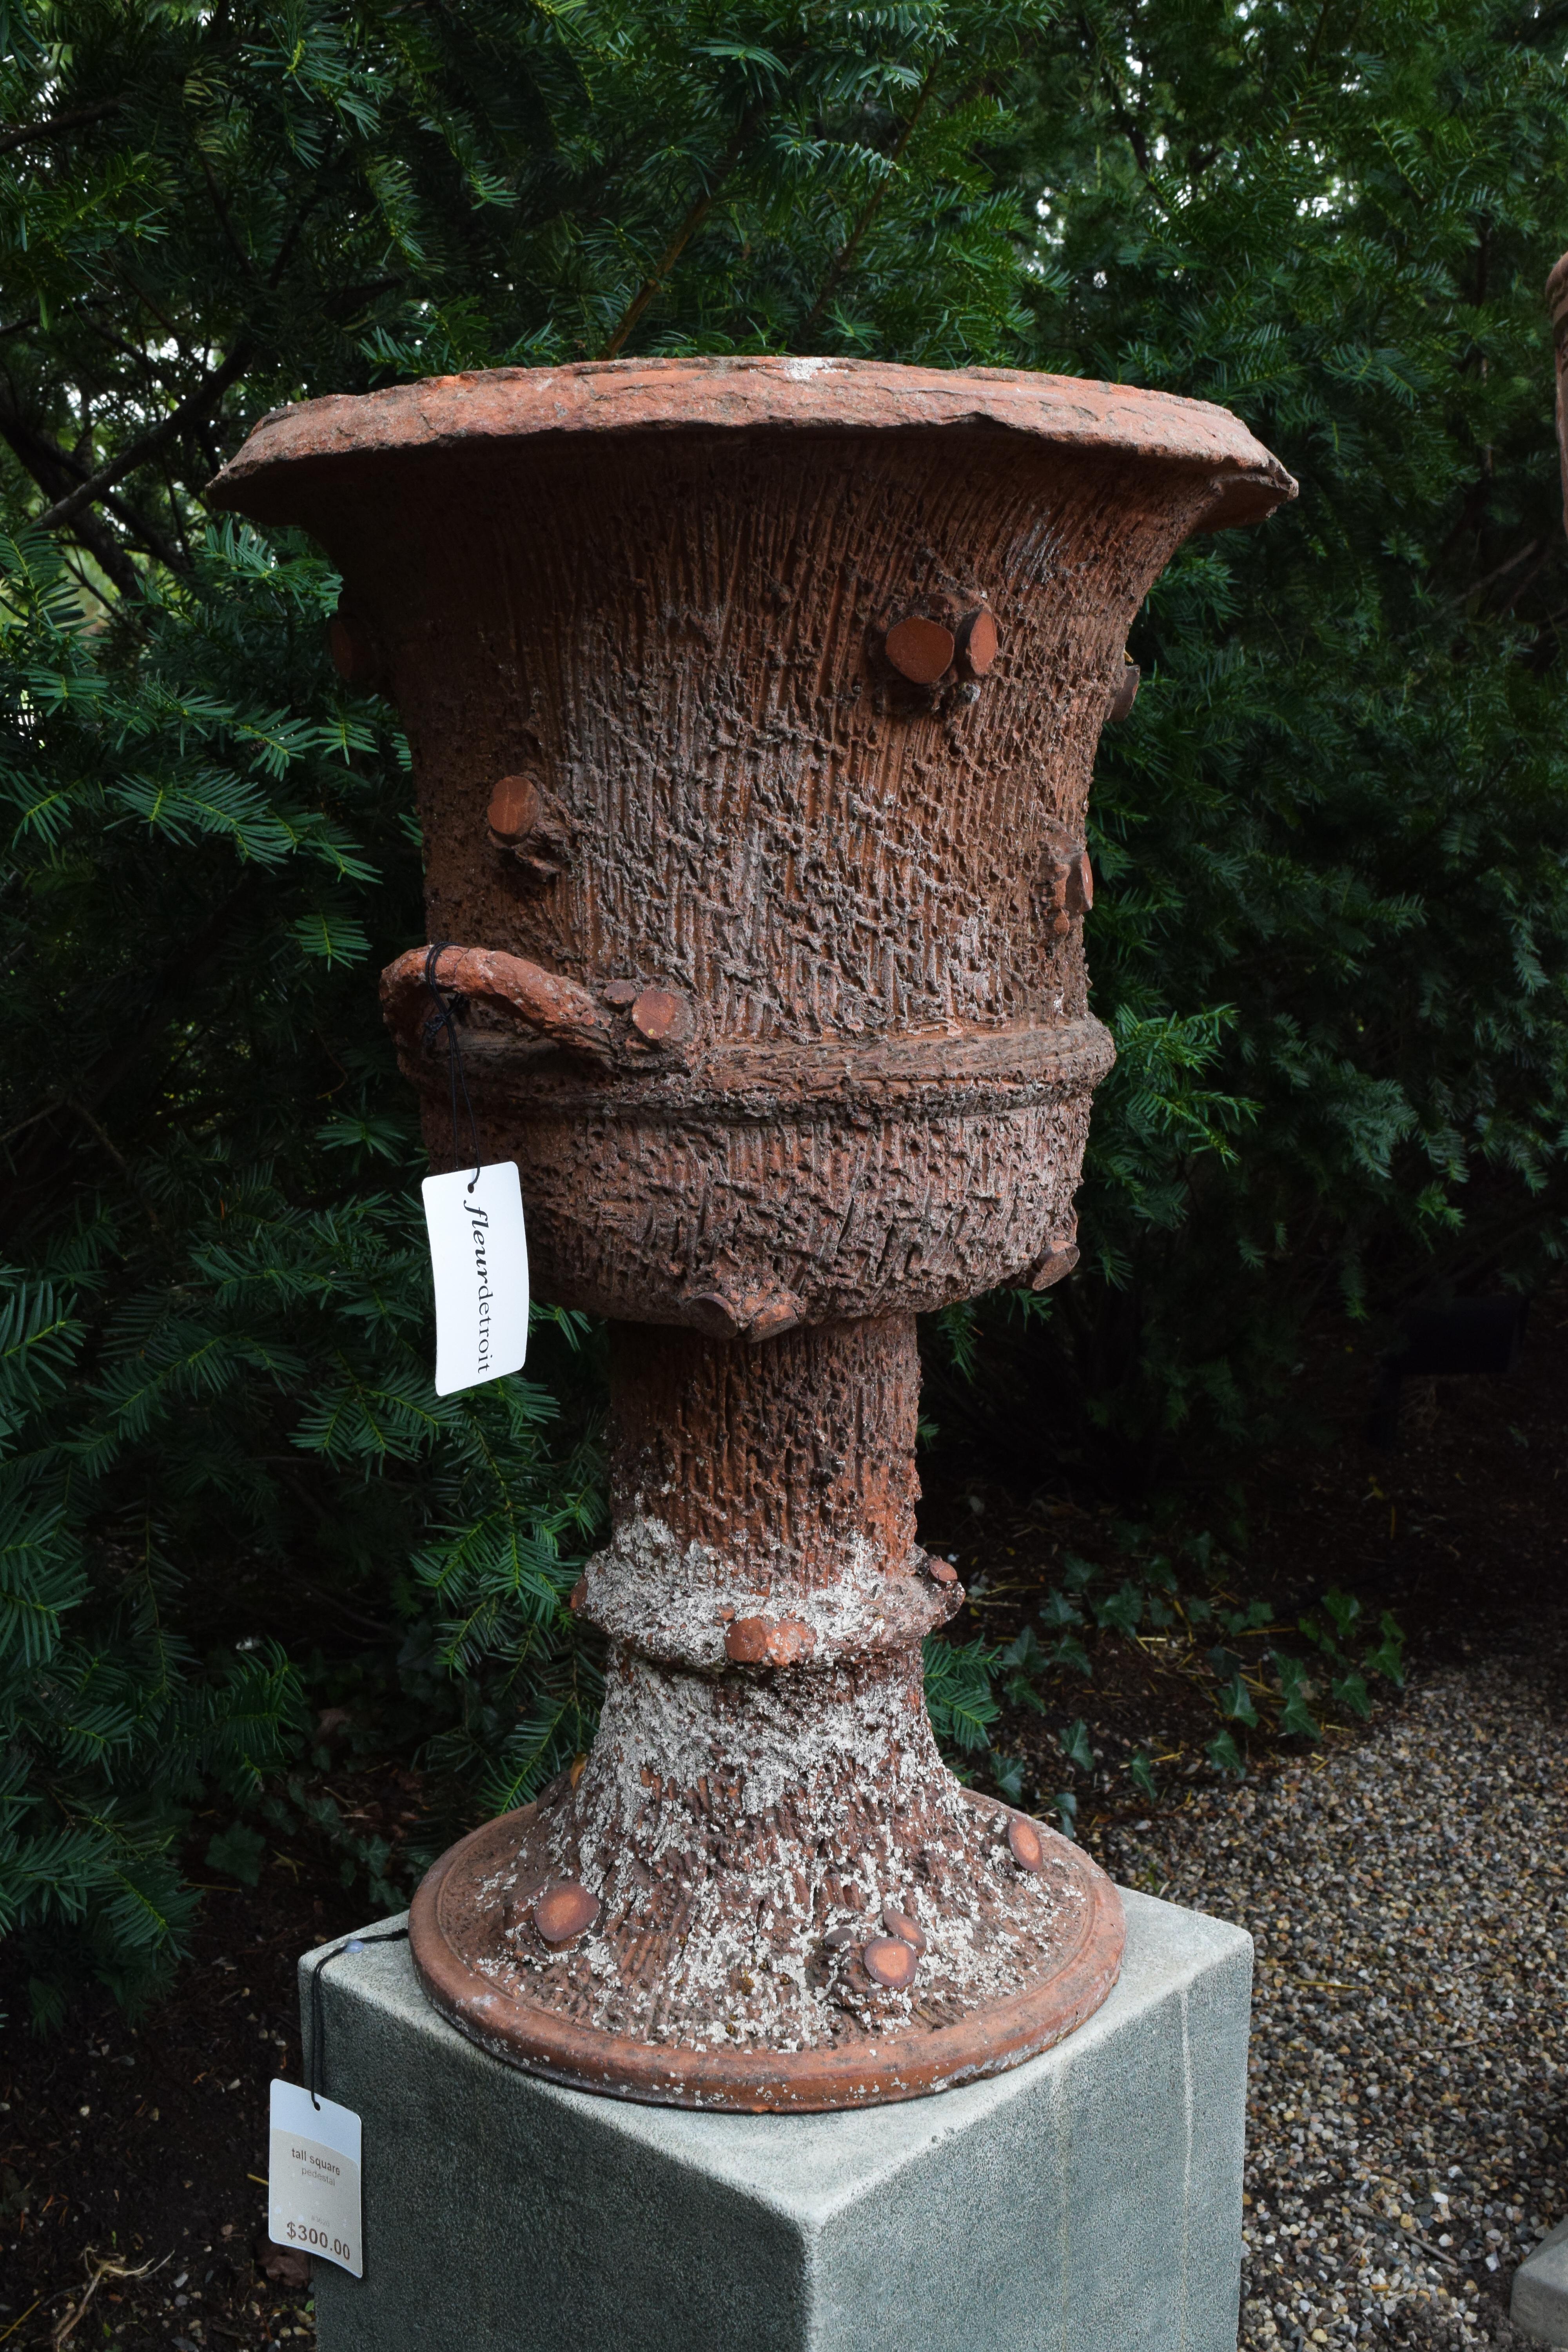 Faux Bois was at its height during the Art Nouveau era in France between the 19th and 20th century. Originally predominantly cast in concrete, this urn is a unique find cast in terracotta. Realistic bark detail and cut limbs, this jardinière is a